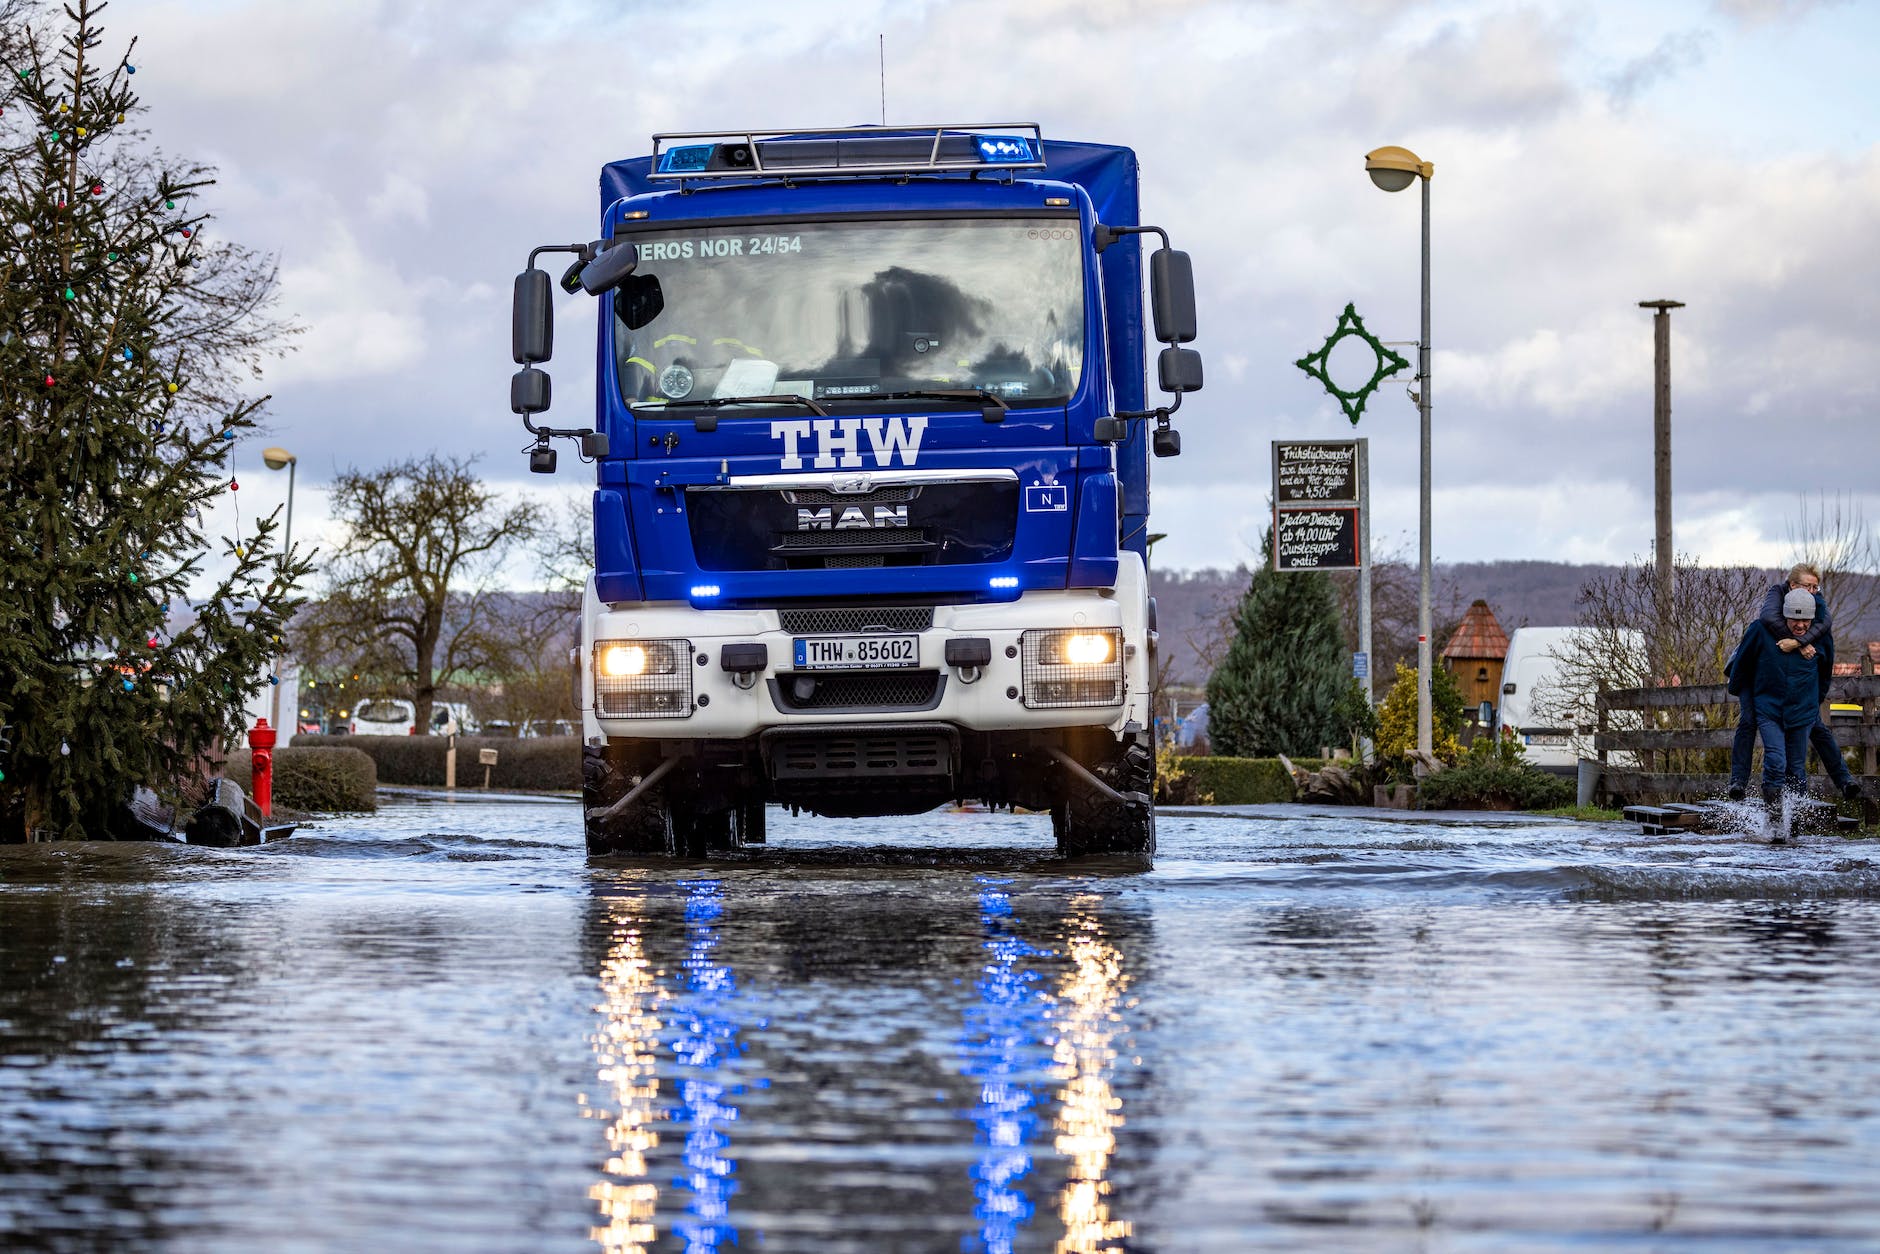 Thuringia, Windehausen: A THW vehicle drives over a flooded street in the town.